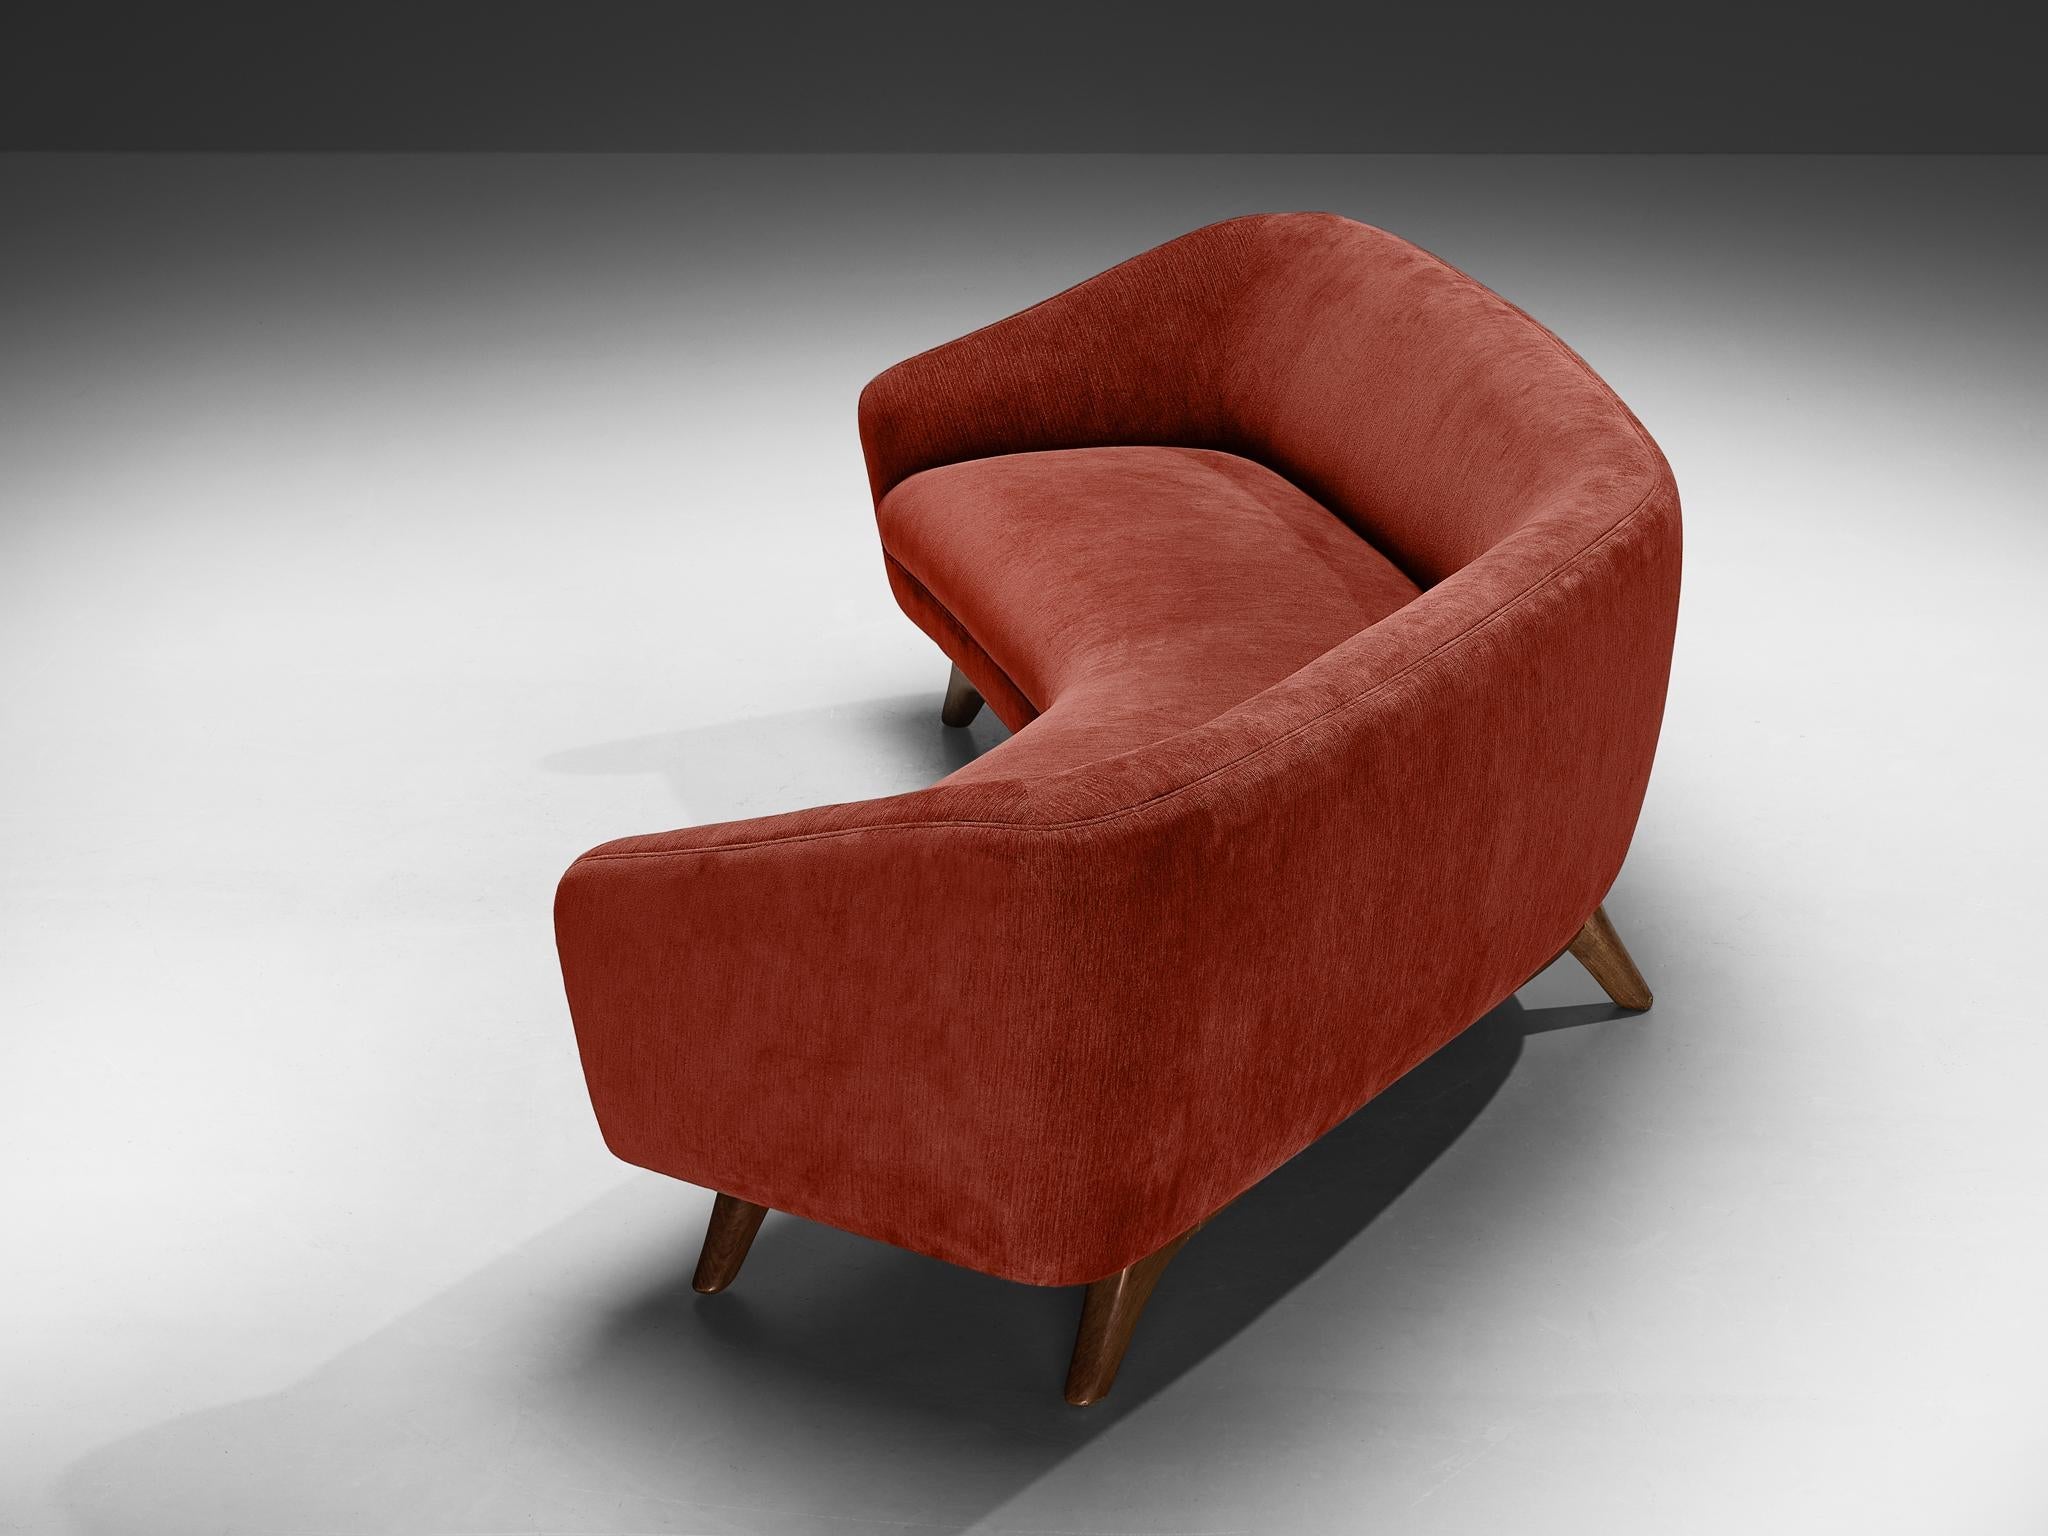 Vladimir Kagan 'Wide Angle' Sofa in Red Brown Upholstery and Walnut